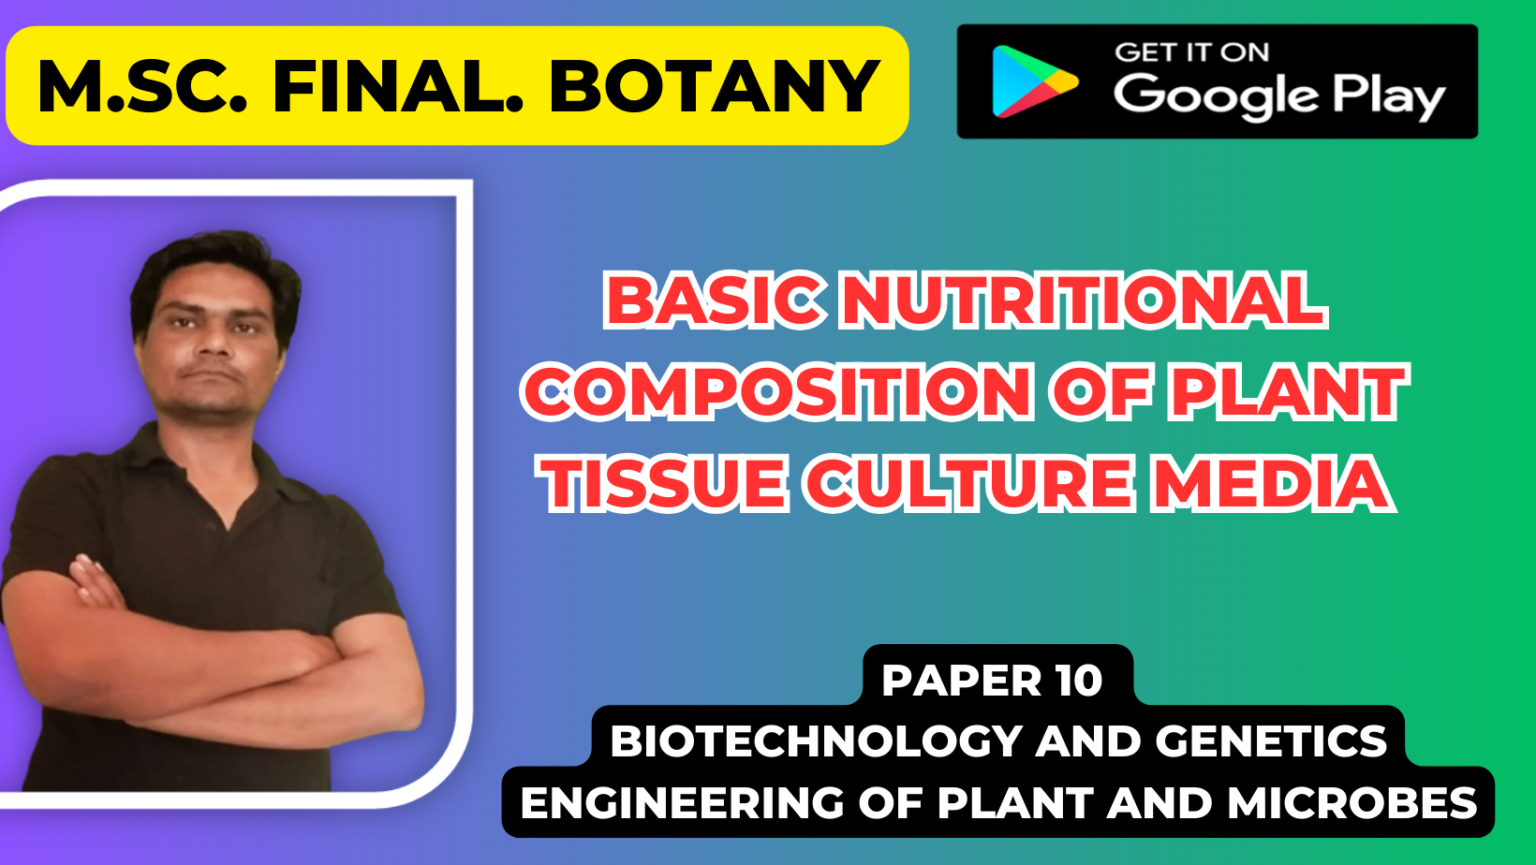 Basic nutritional composition of plant tissue culture media